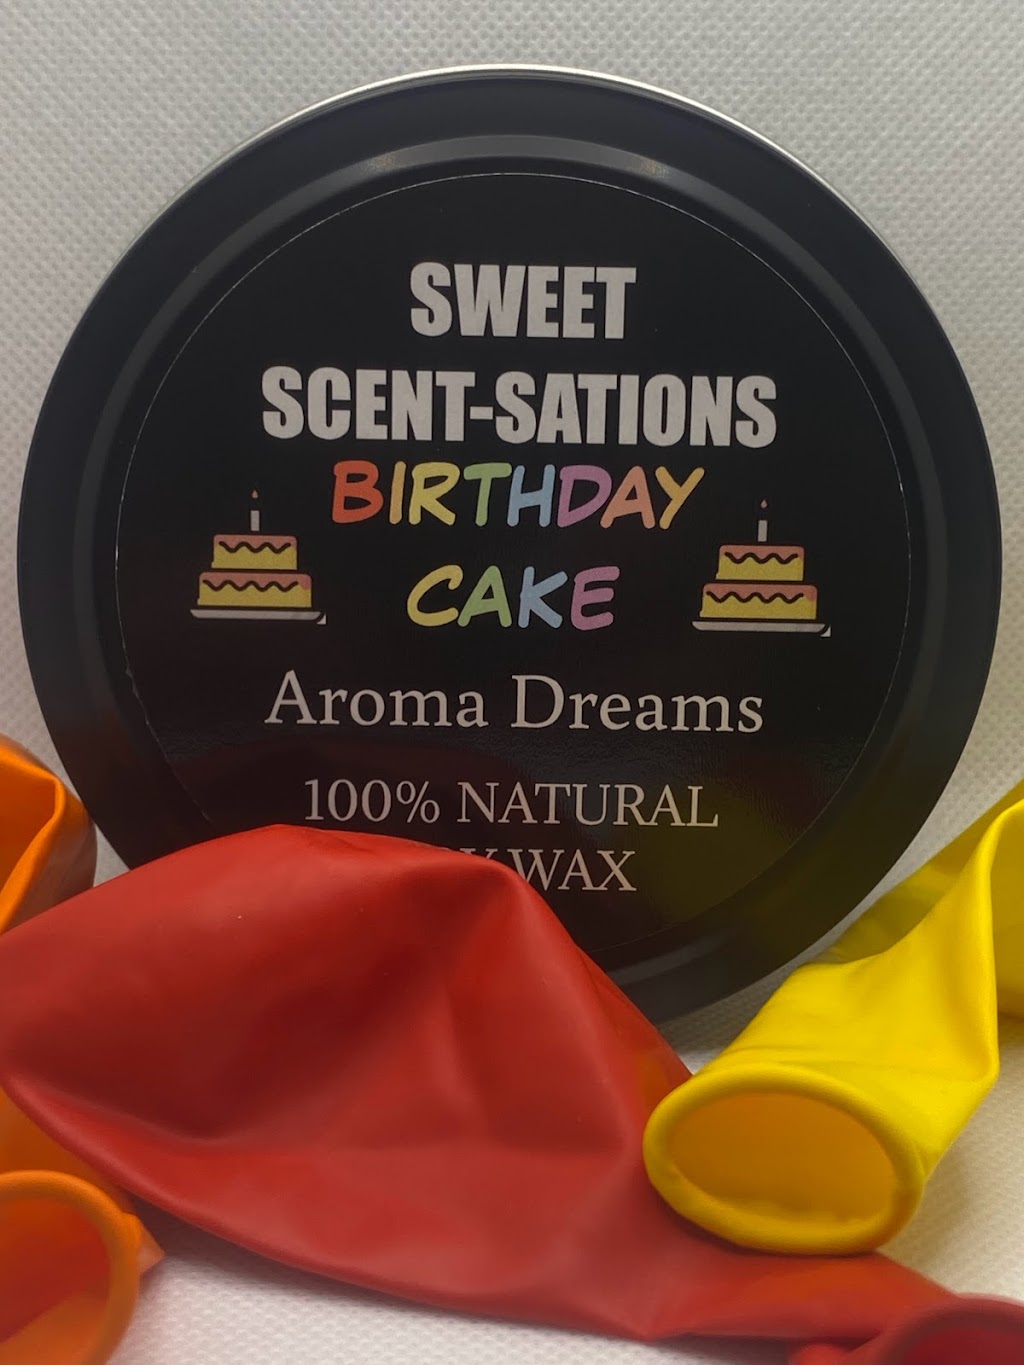 Aroma Dreams Batemans Bay - candles & gifts | home goods store | 37 Litchfield Cres, Long Beach NSW 2536, Australia | 0423605715 OR +61 423 605 715